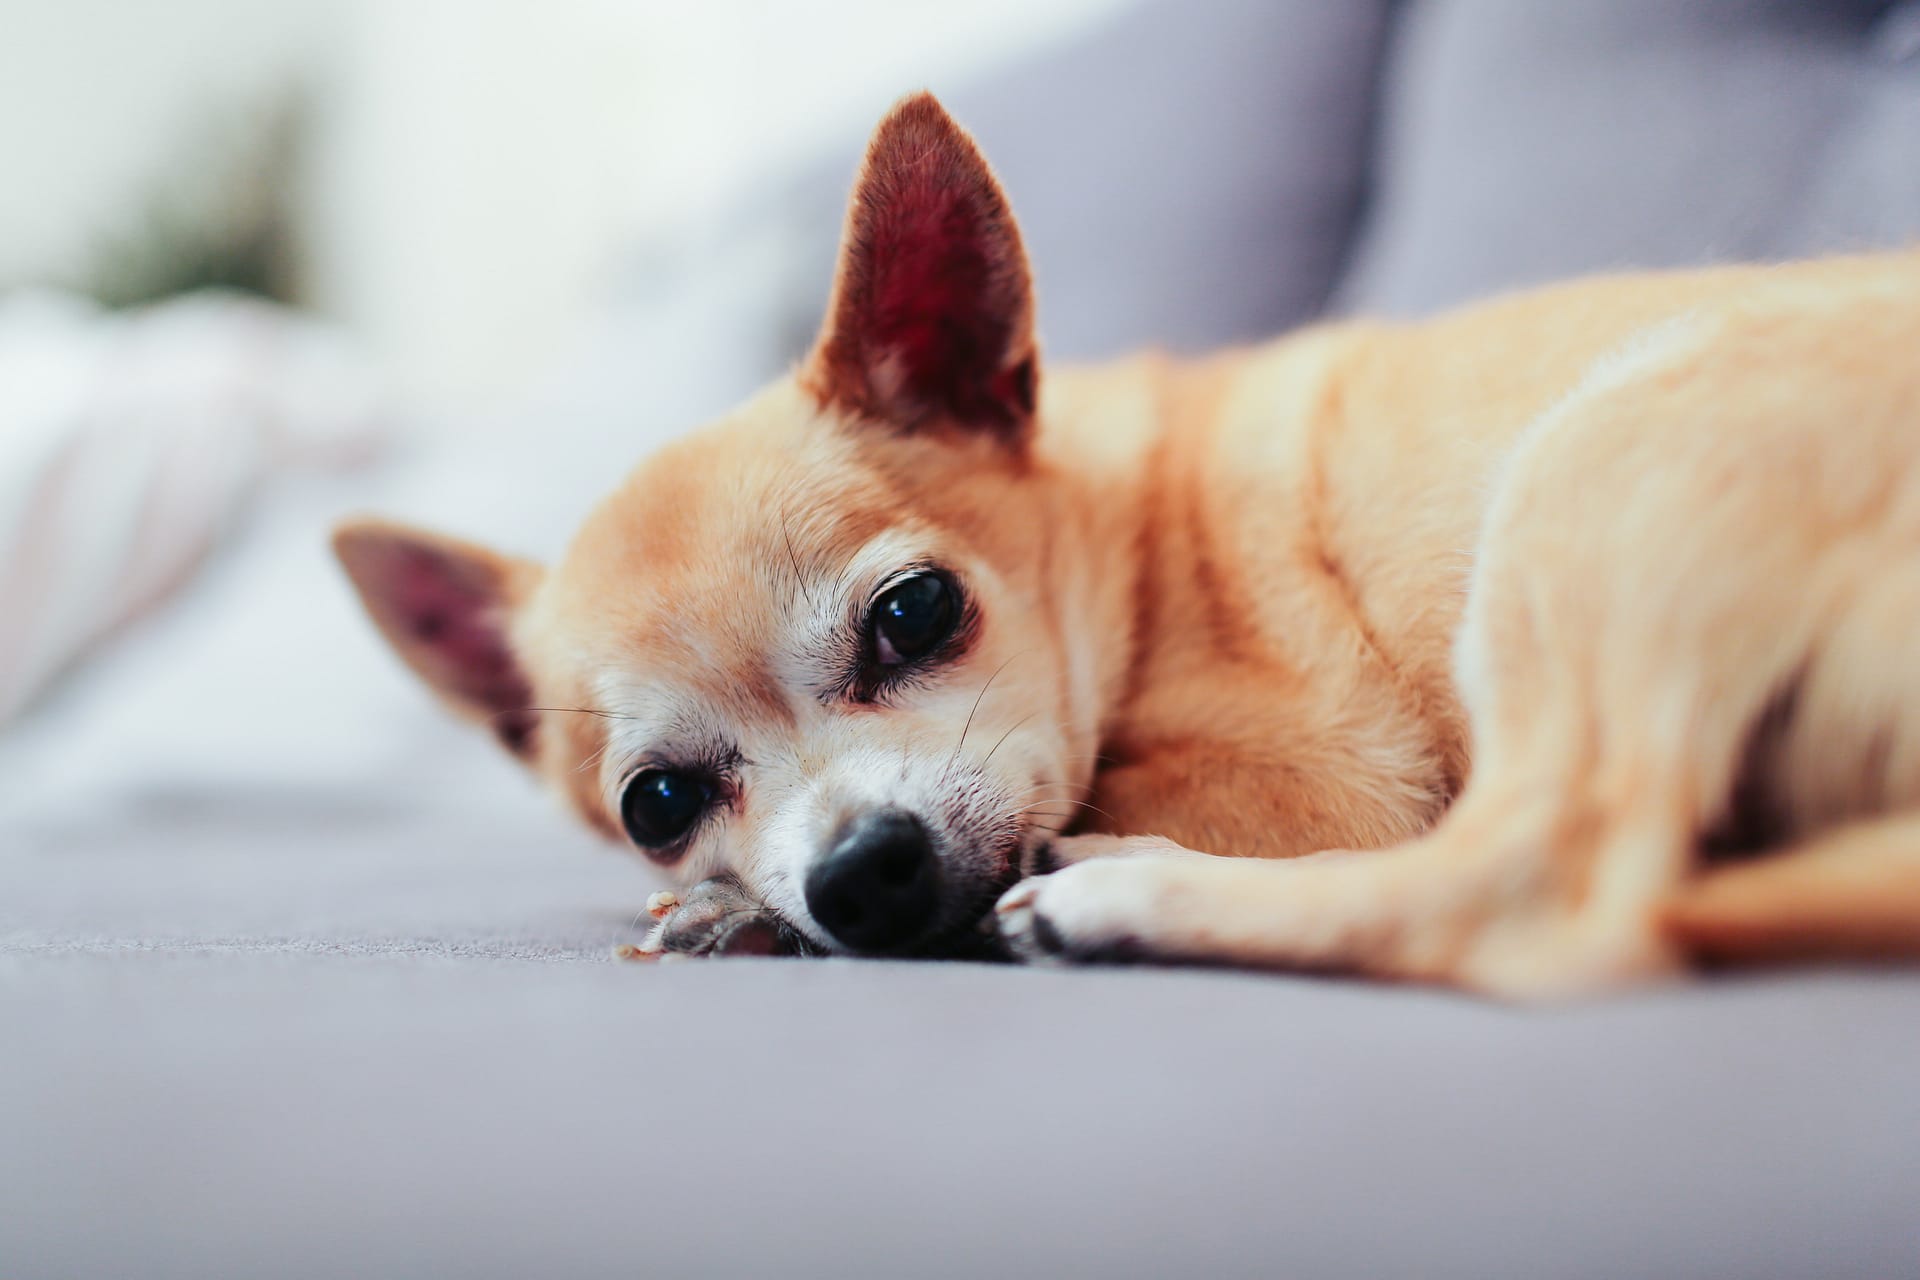 A tiny dog comfortably lies in bed ready for a nap